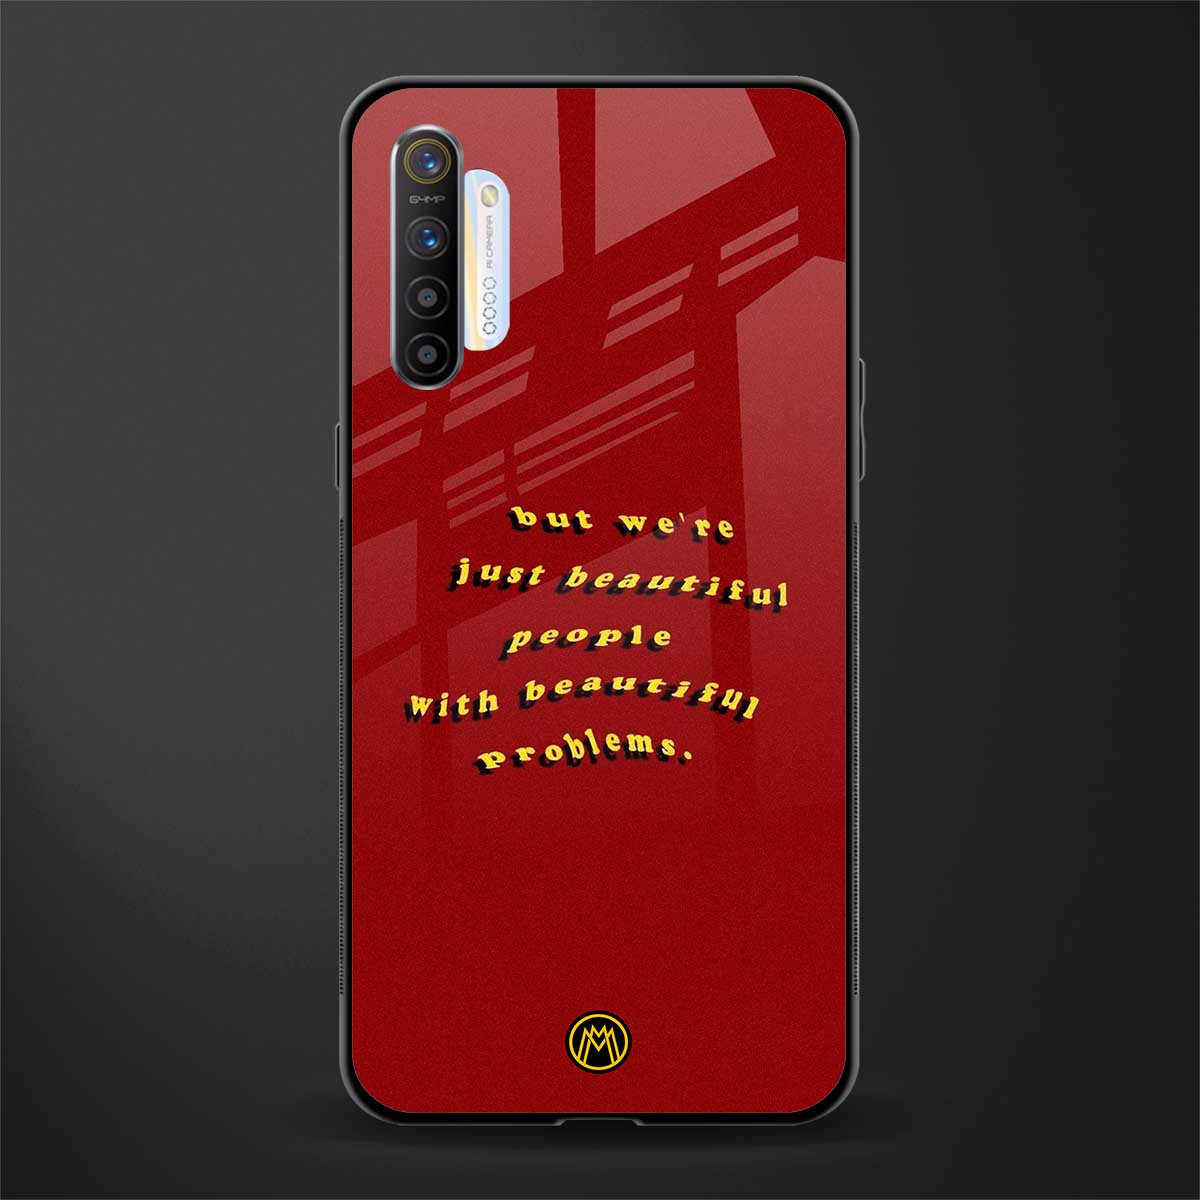 beautiful people with beautiful problems glass case for realme xt image